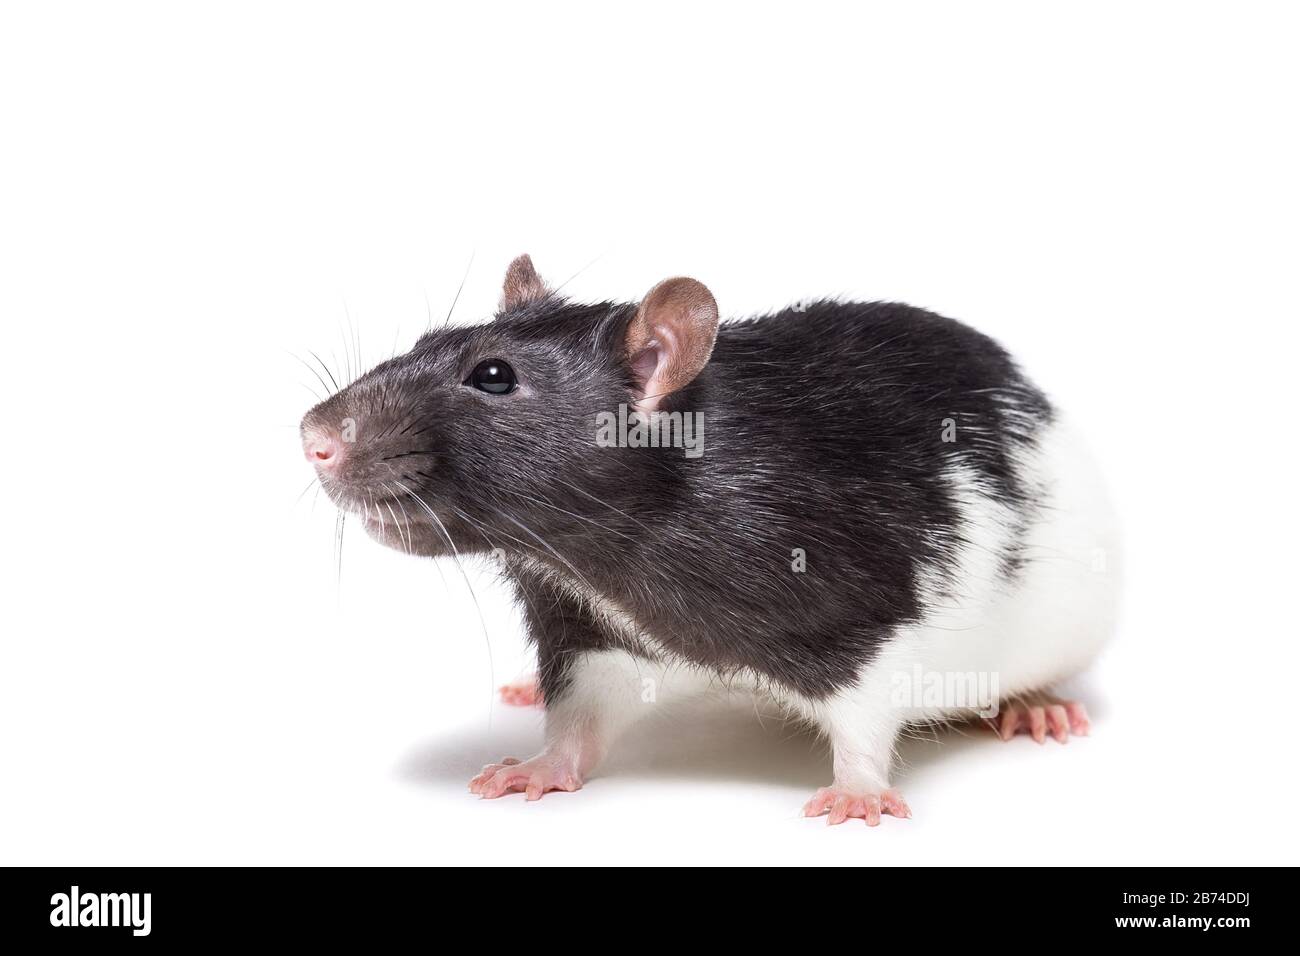 rat close-up isolated on white background, the rat is a symbol of the year 2020 Stock Photo